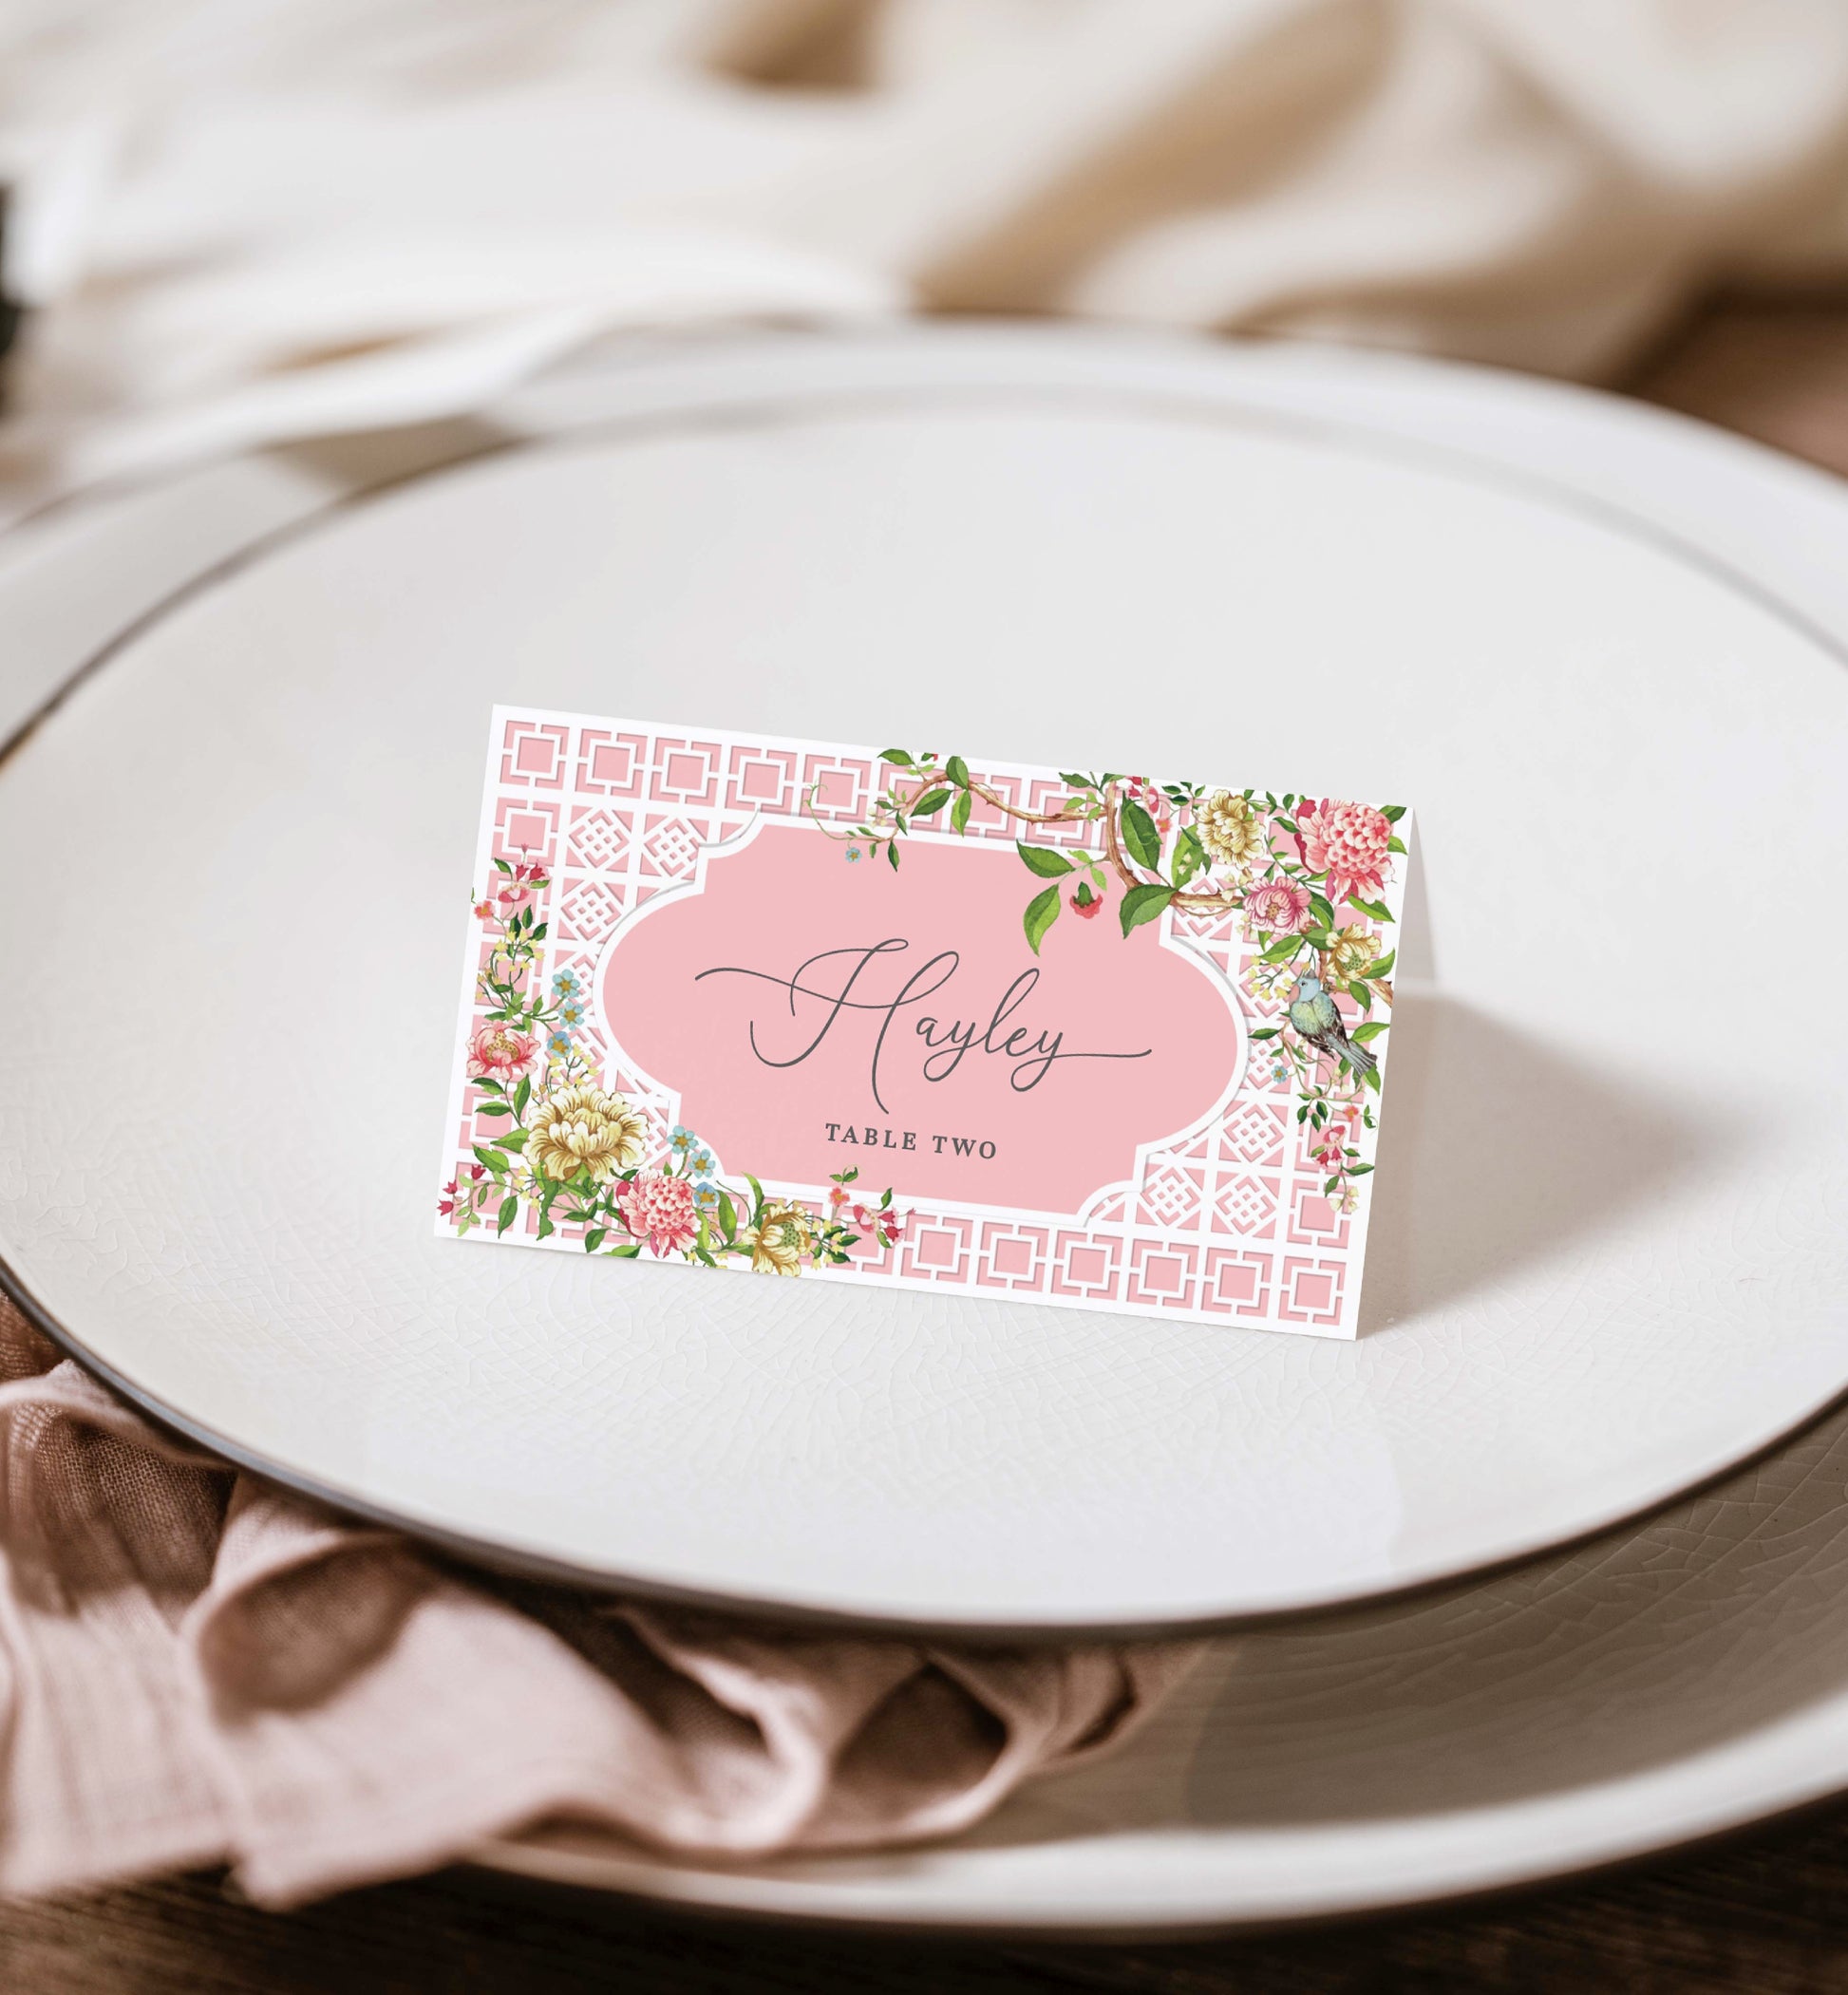 Marie Antoinette Theme Party Printable Place Card Template, Floral Chinoiserie Lattice, French Garden Theme, Bridal Shower Escort Cards Template, Spring Floral, Trianon